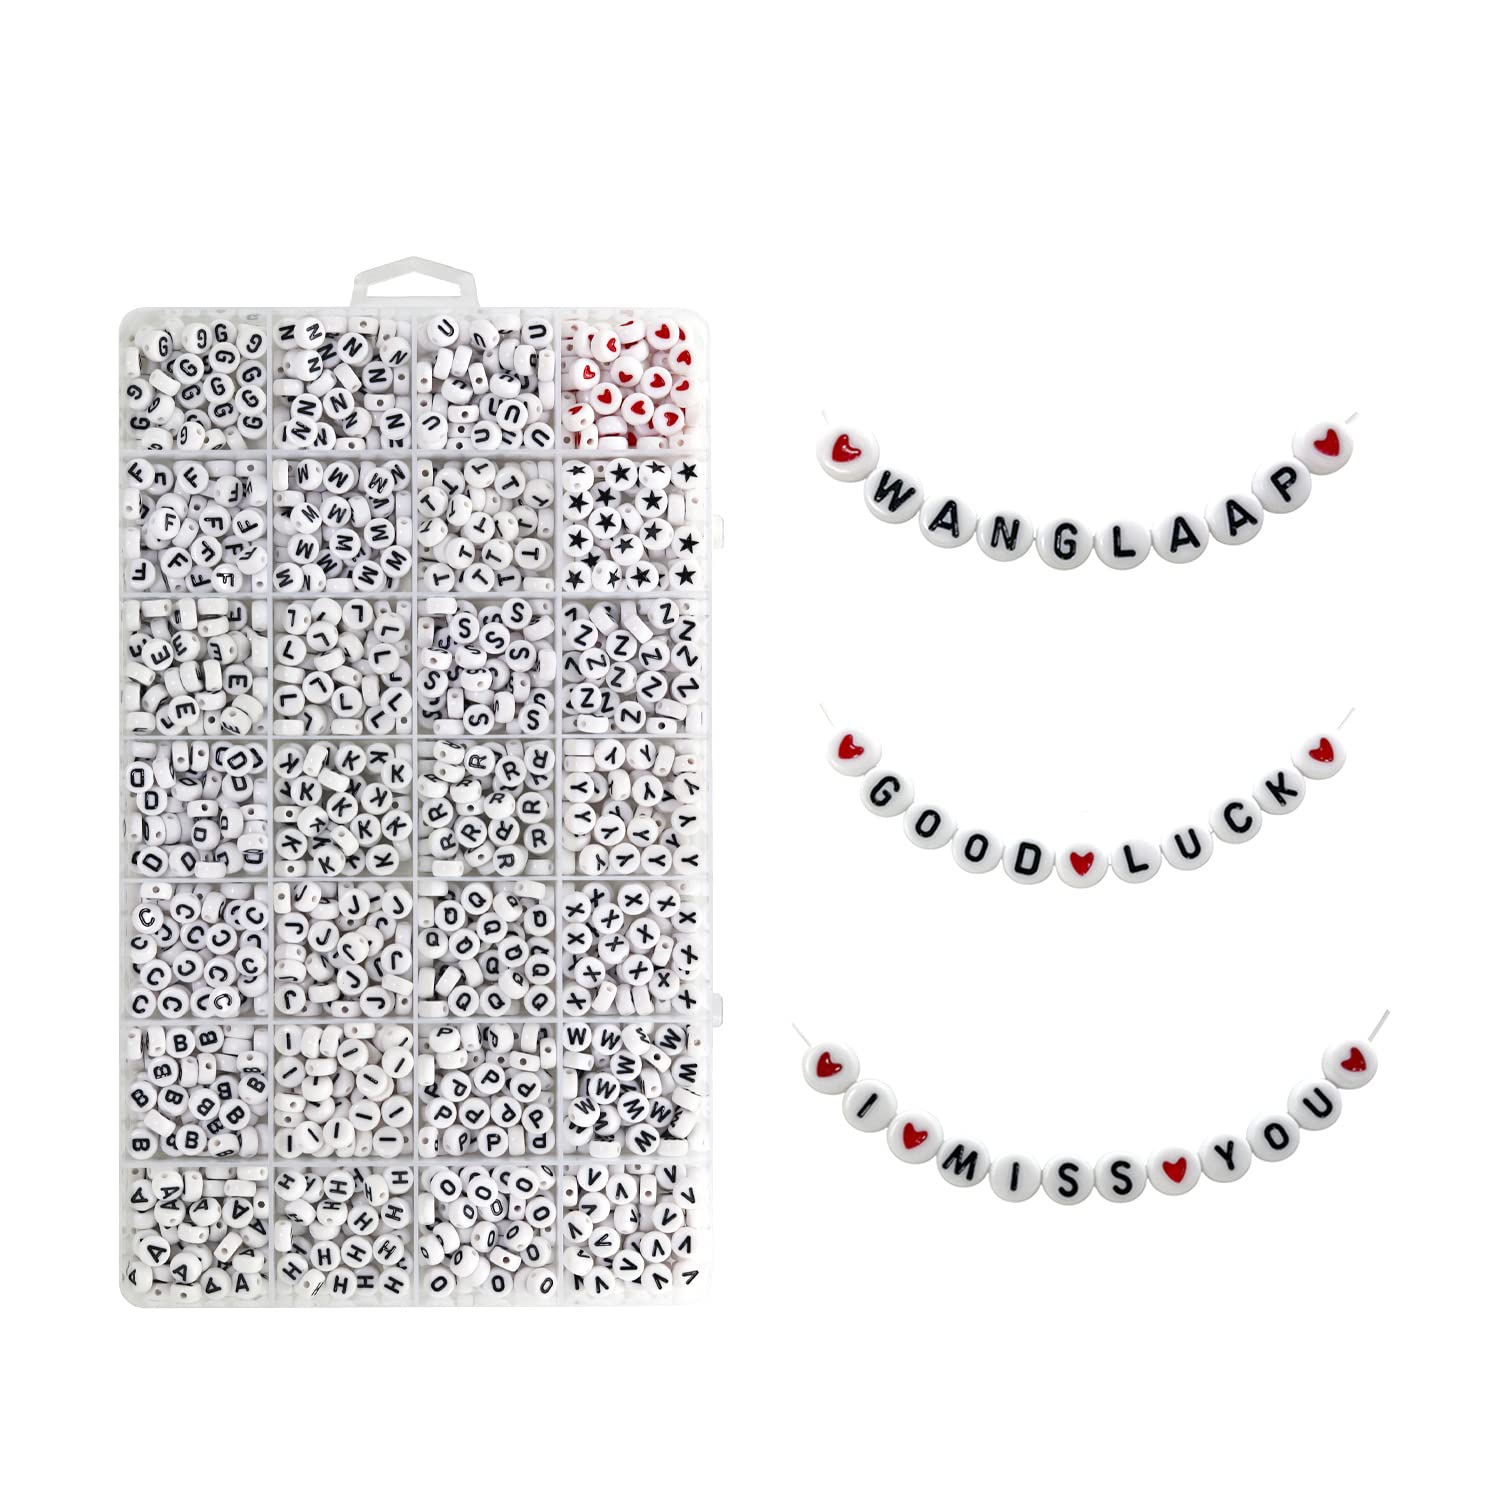  WangLaap 1450Pcs Letter Beads, Acrylic 4x7mm Round Letter Beads  Kits, Alphabet Beads A-Z and Red Heart Black Star Beads for Bracelets  Necklaces DIY Jewelry Making (White)